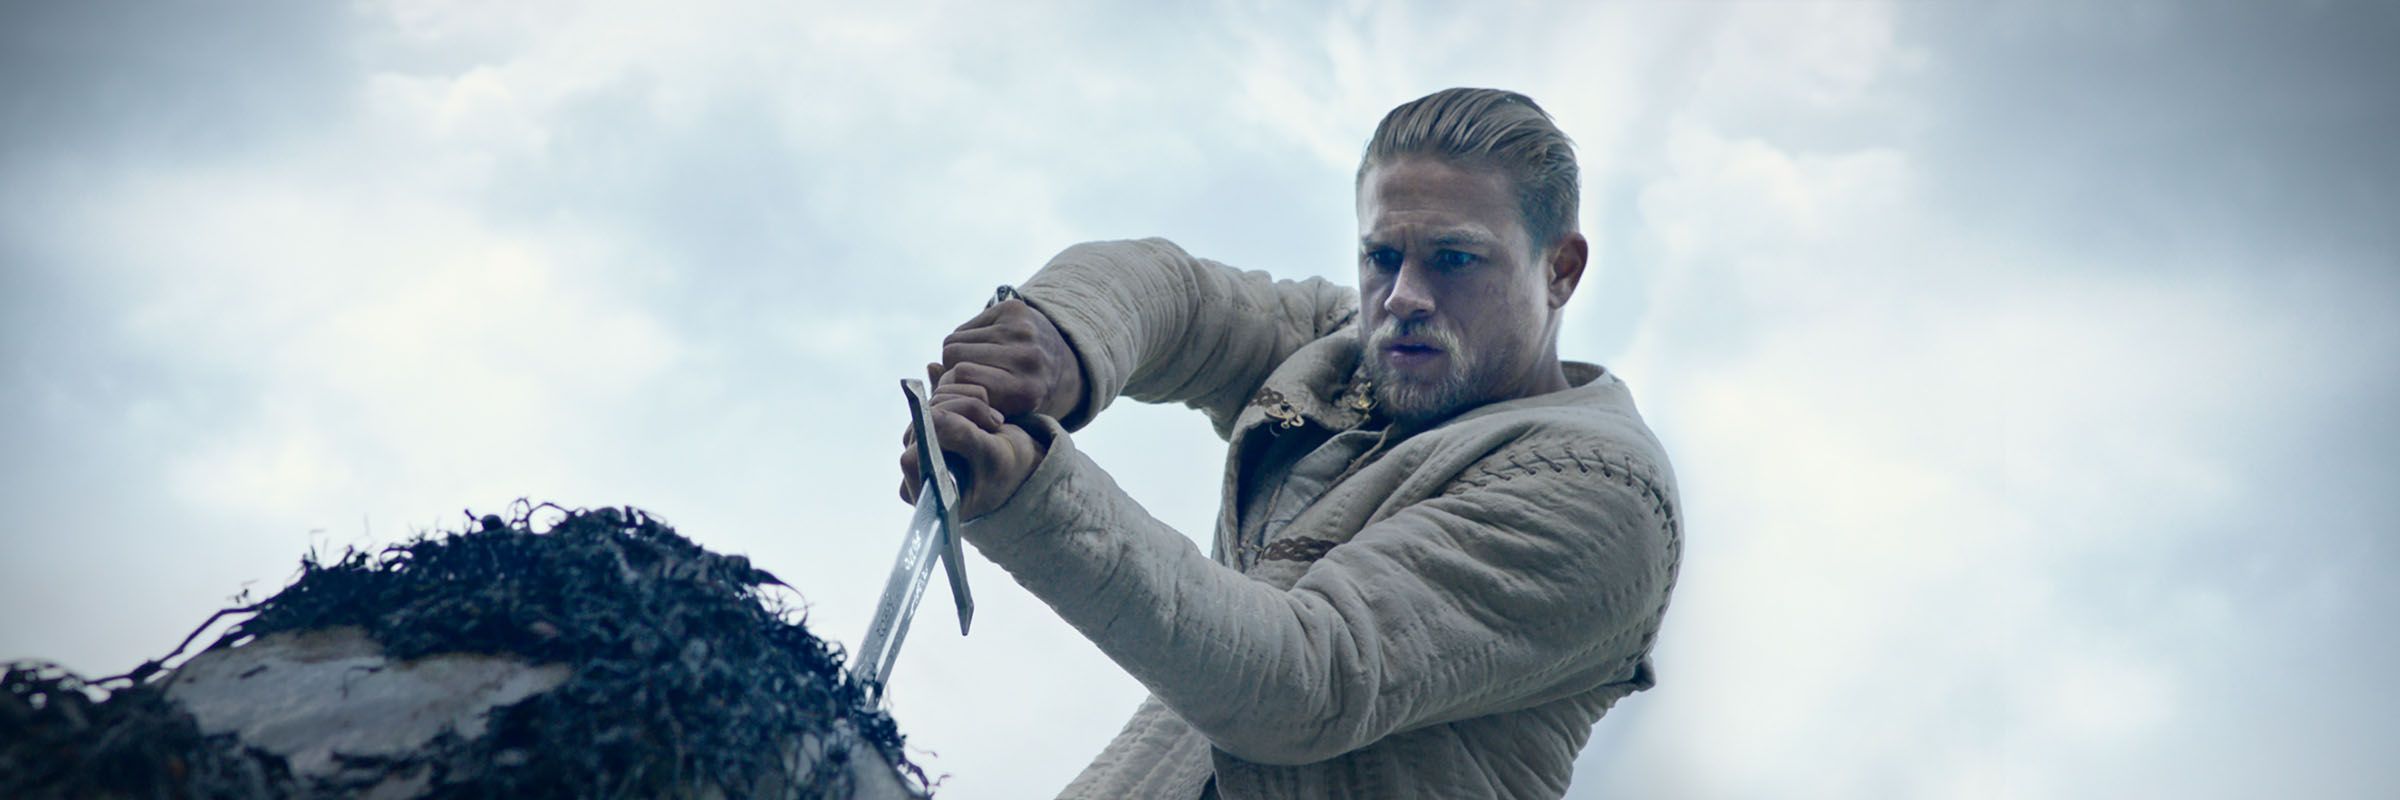 King Arthur Legend Of The Sword Full Movie Movies Anywhere